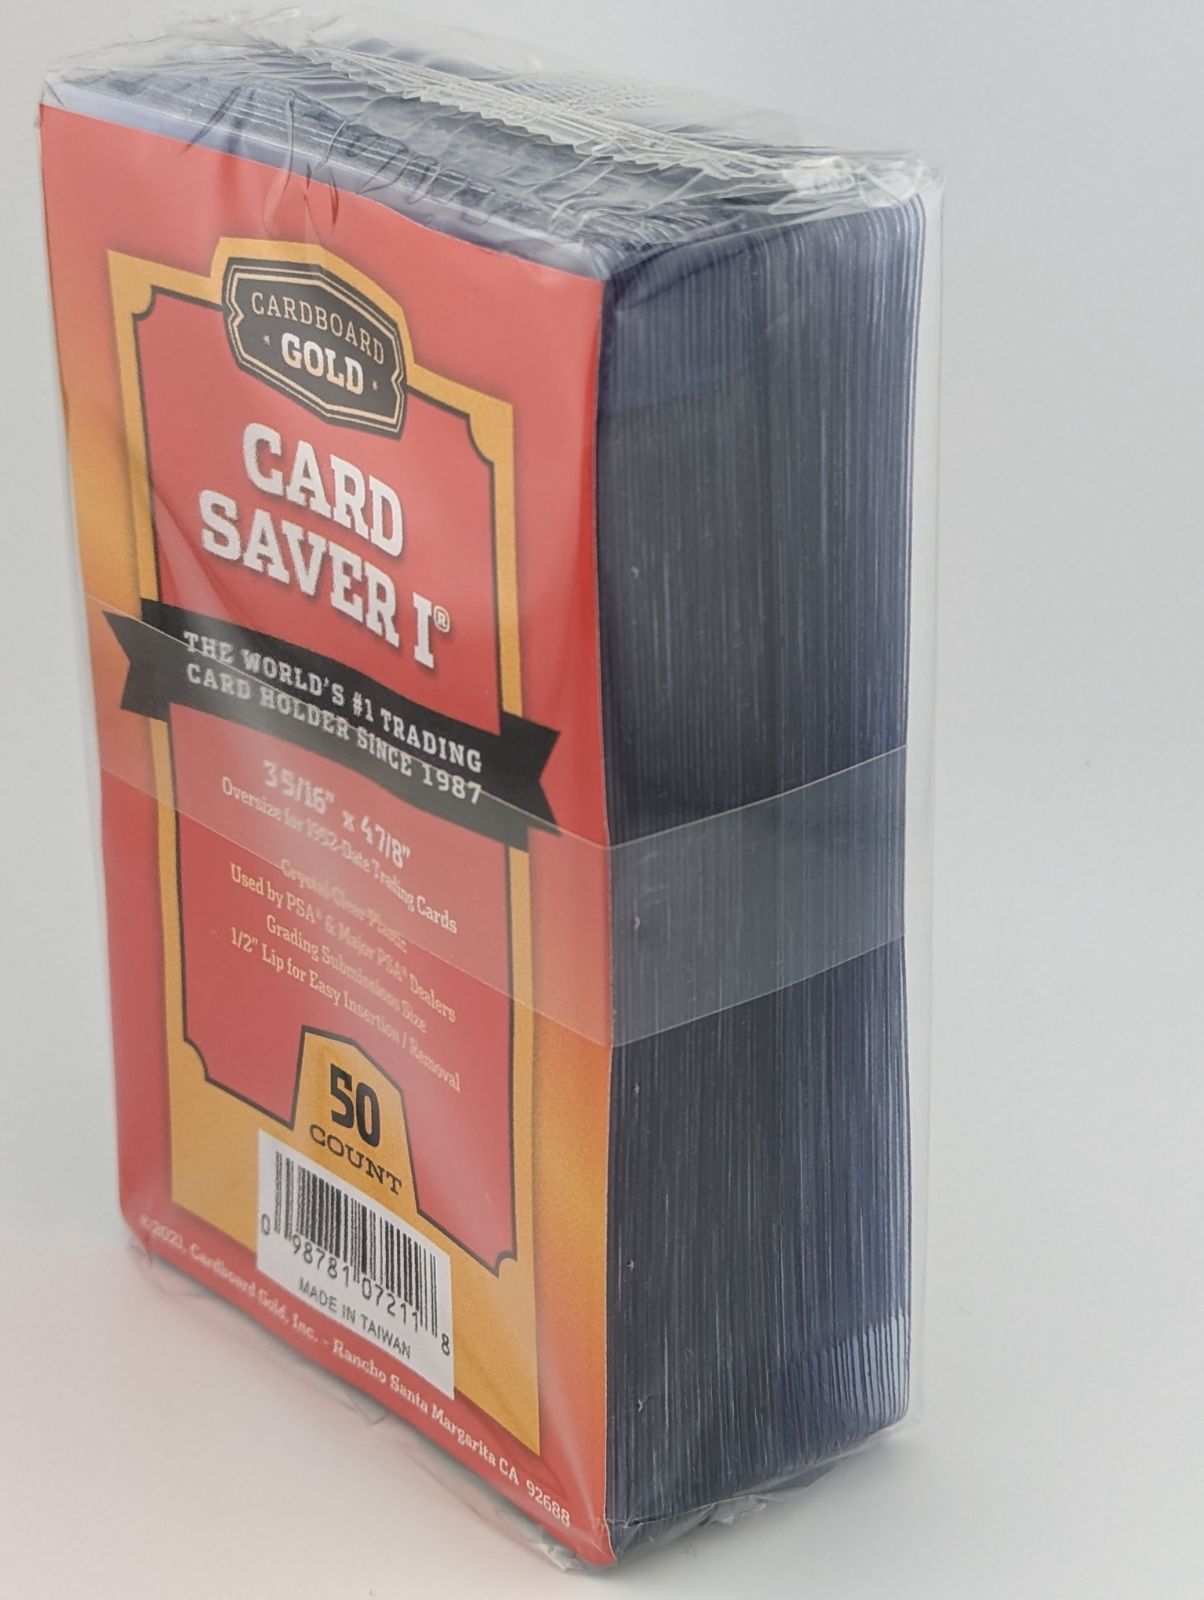 Card Saver 1 Card Holder for Sports & Trading Cards